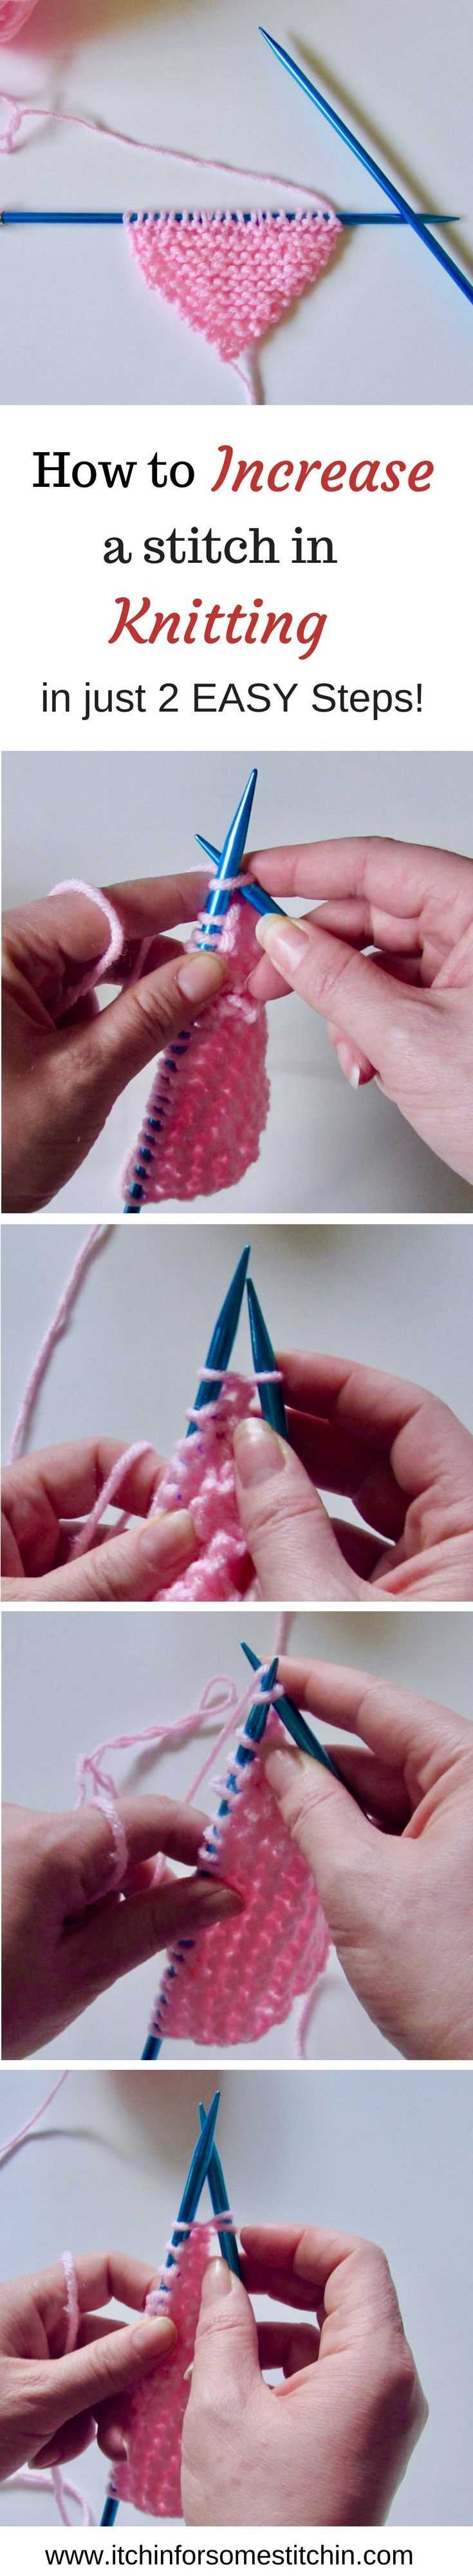 Learn How to Increase a Stitch When Knitting